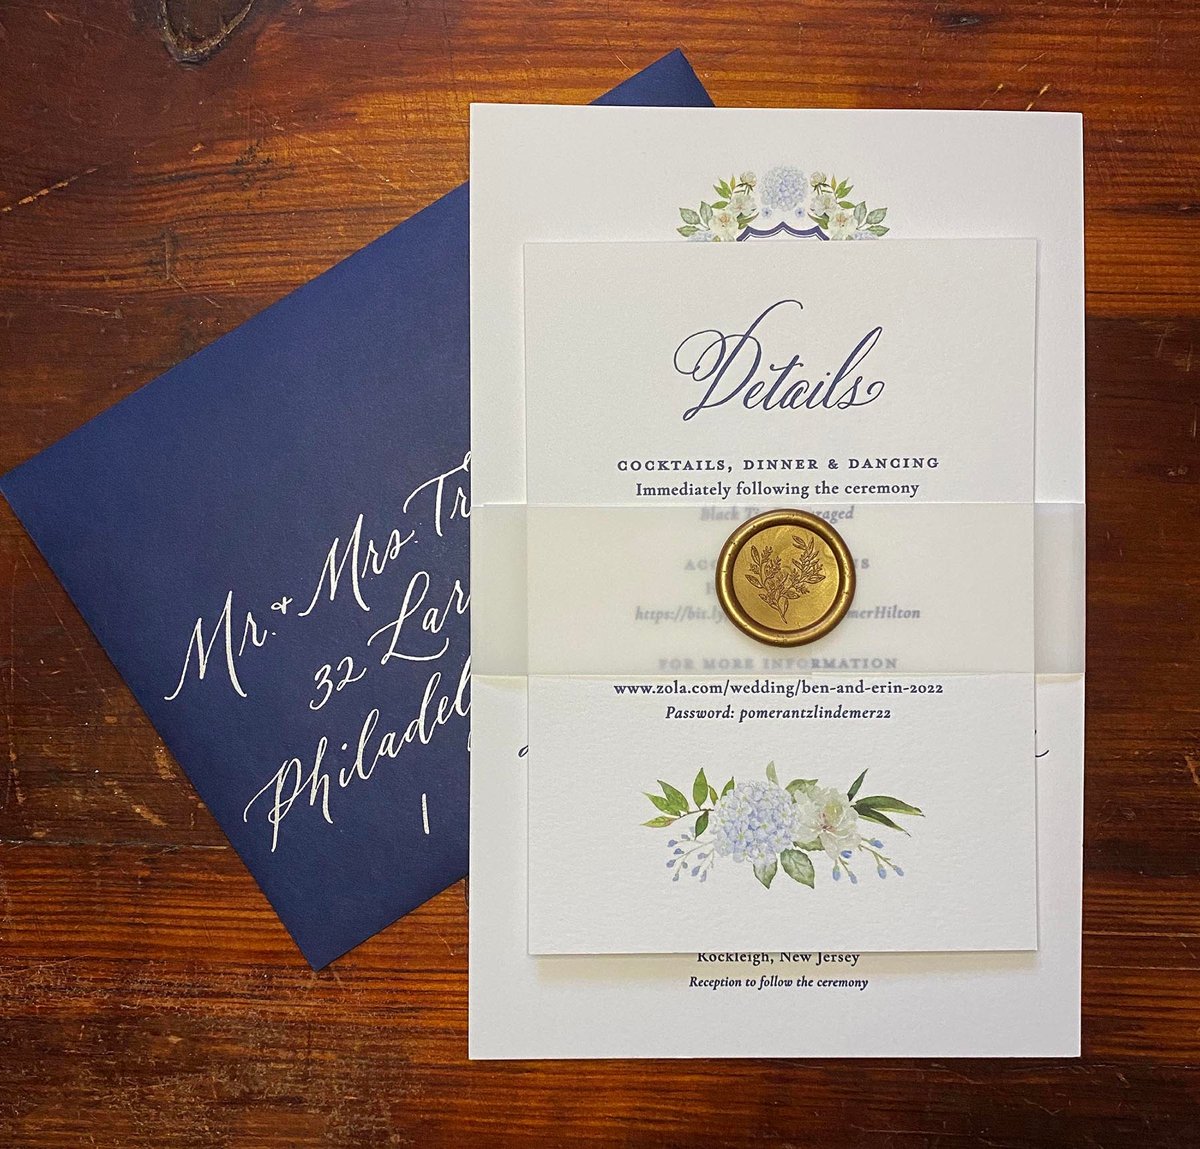 How to use vellum in your wedding invitations